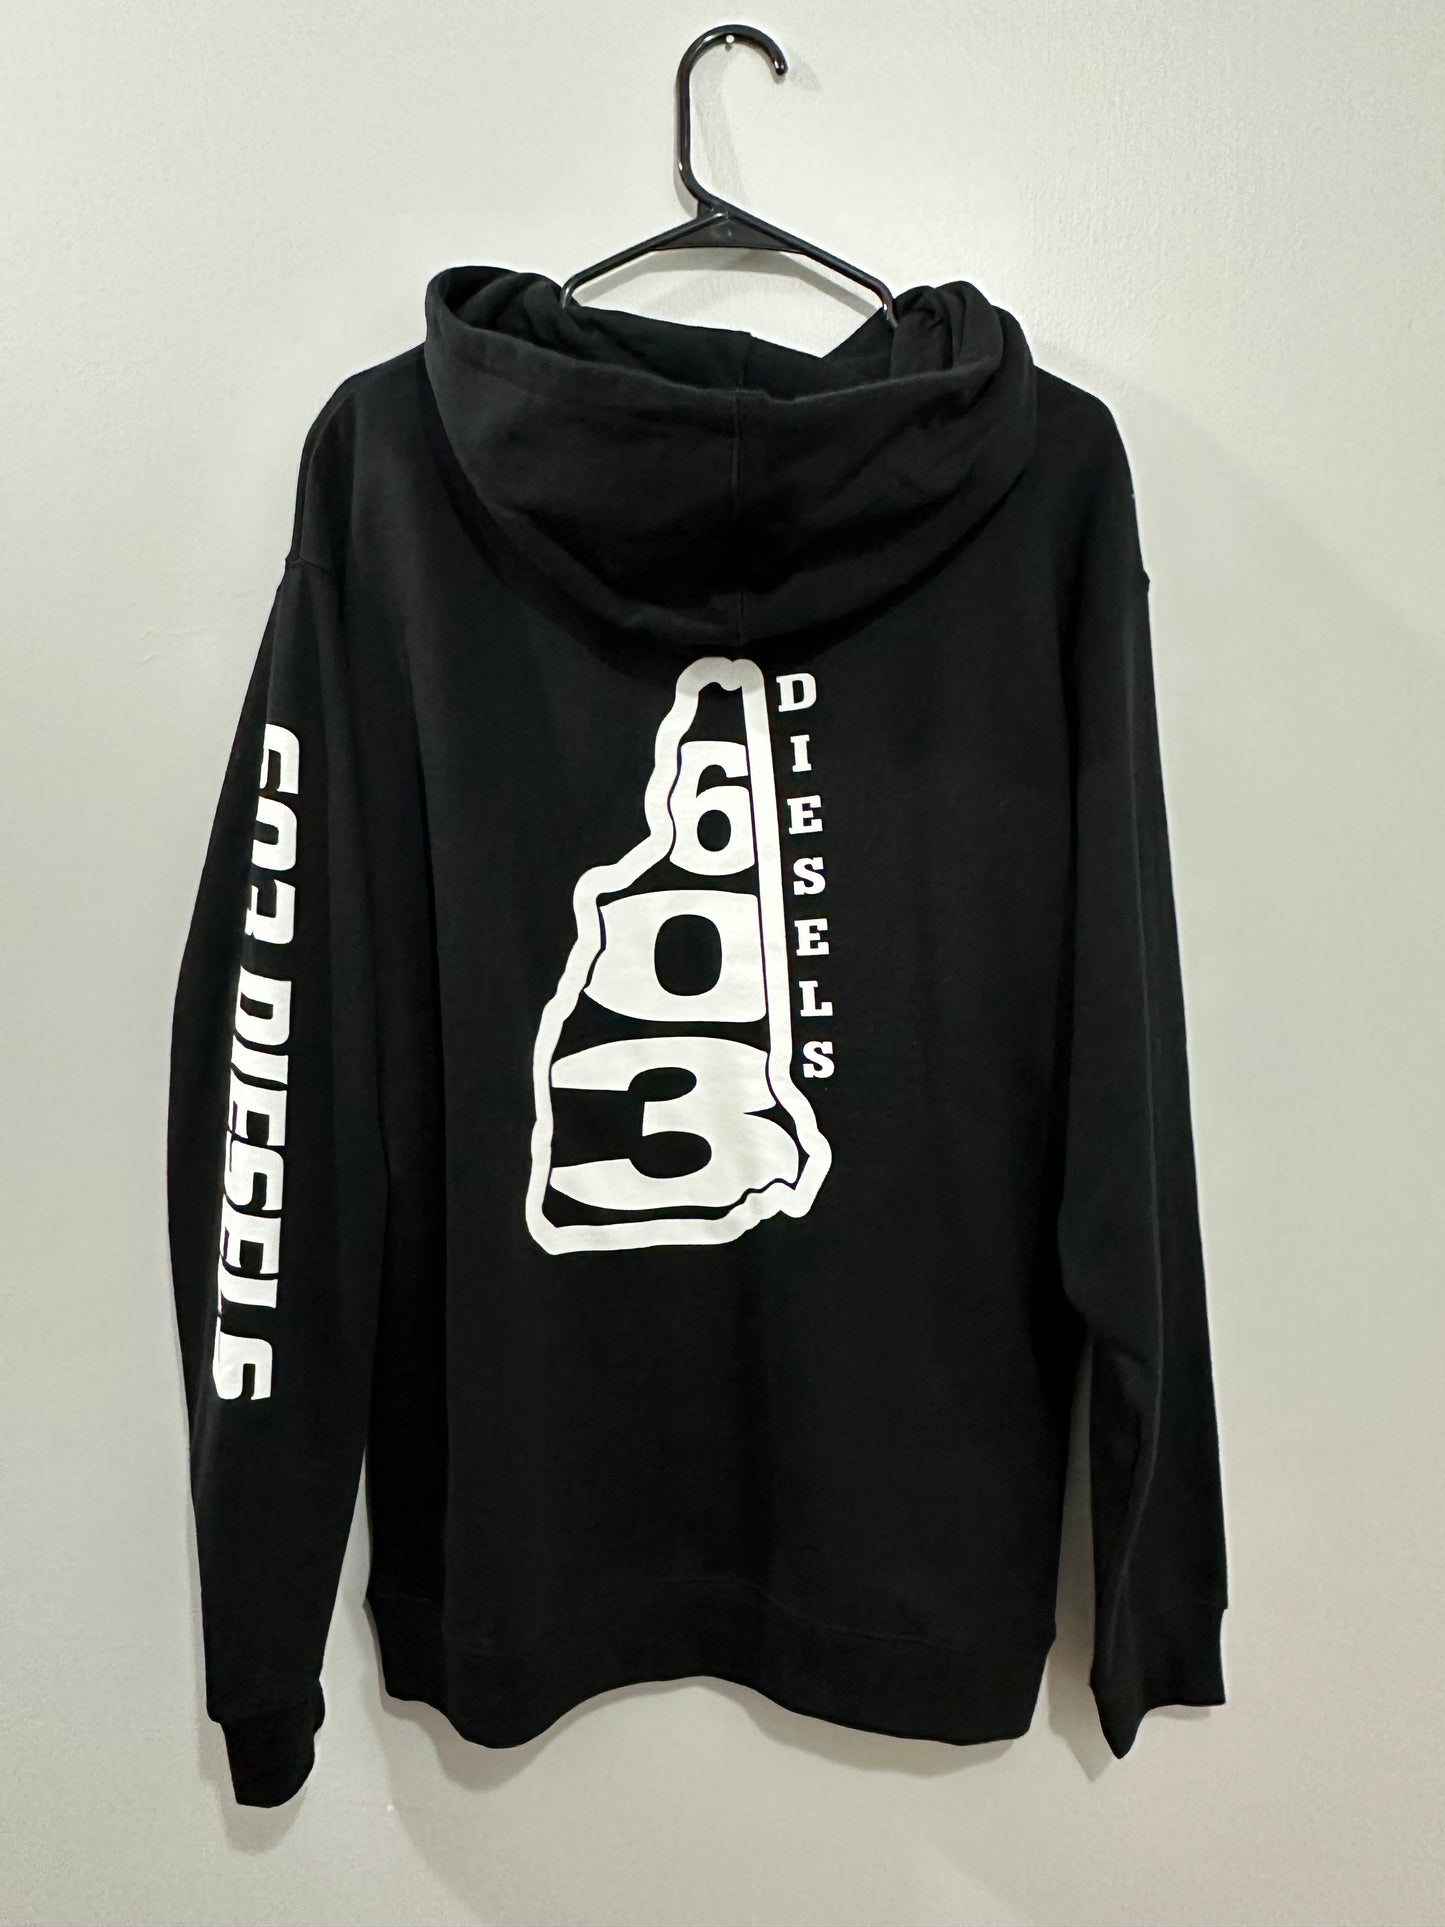 NH State Outline Hoodie